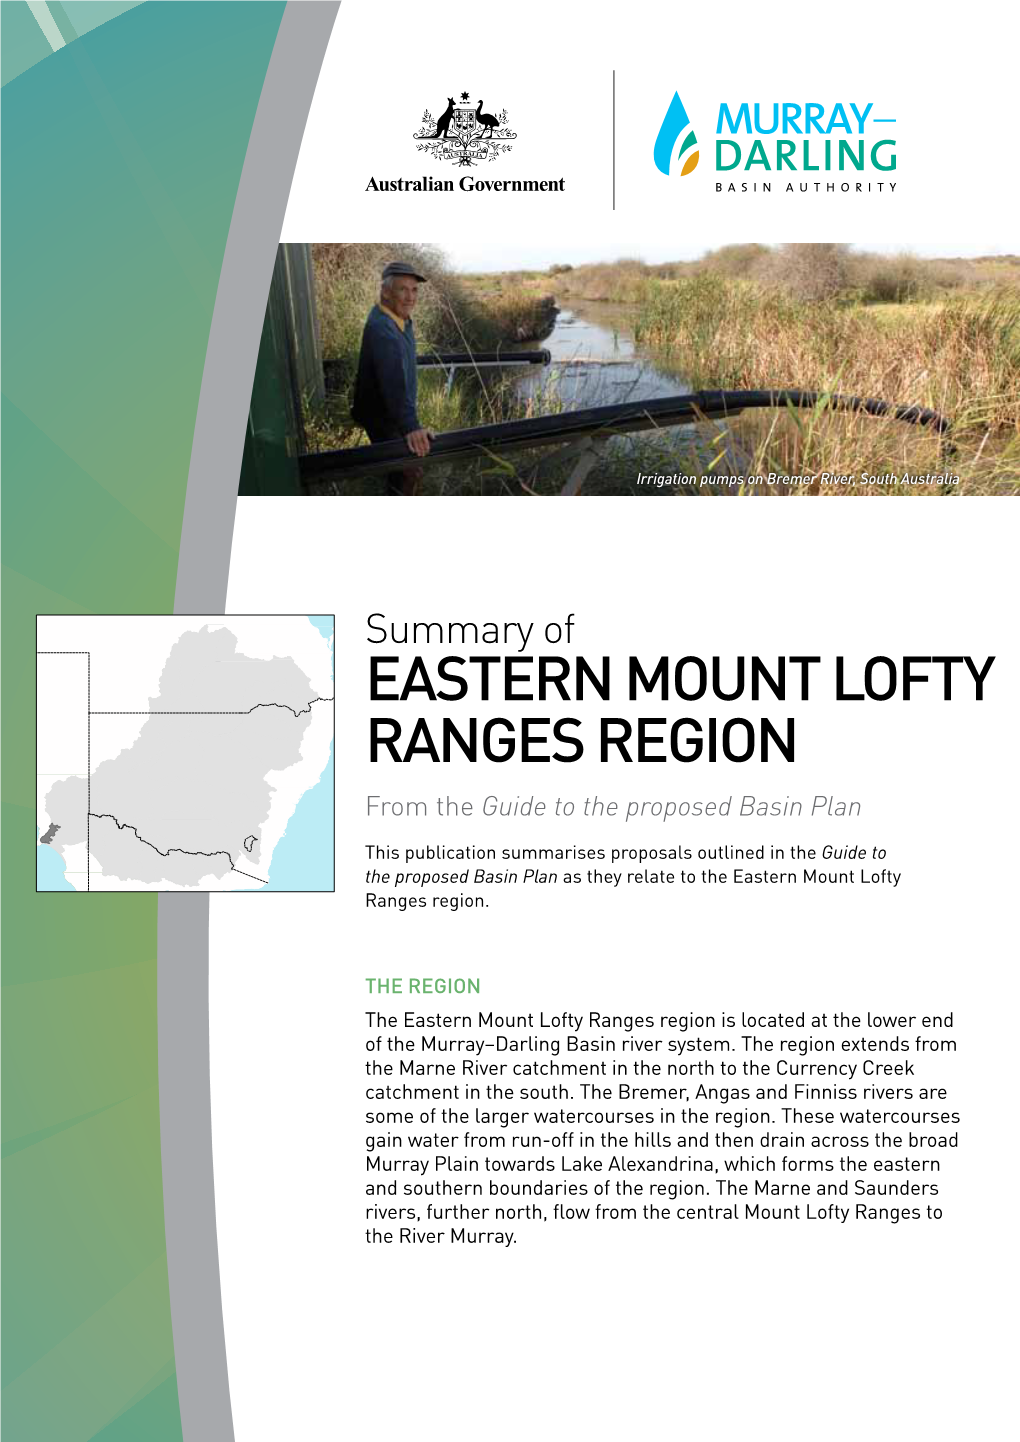 EASTERN MOUNT LOFTY RANGES REGION from the Guide to the Proposed Basin Plan